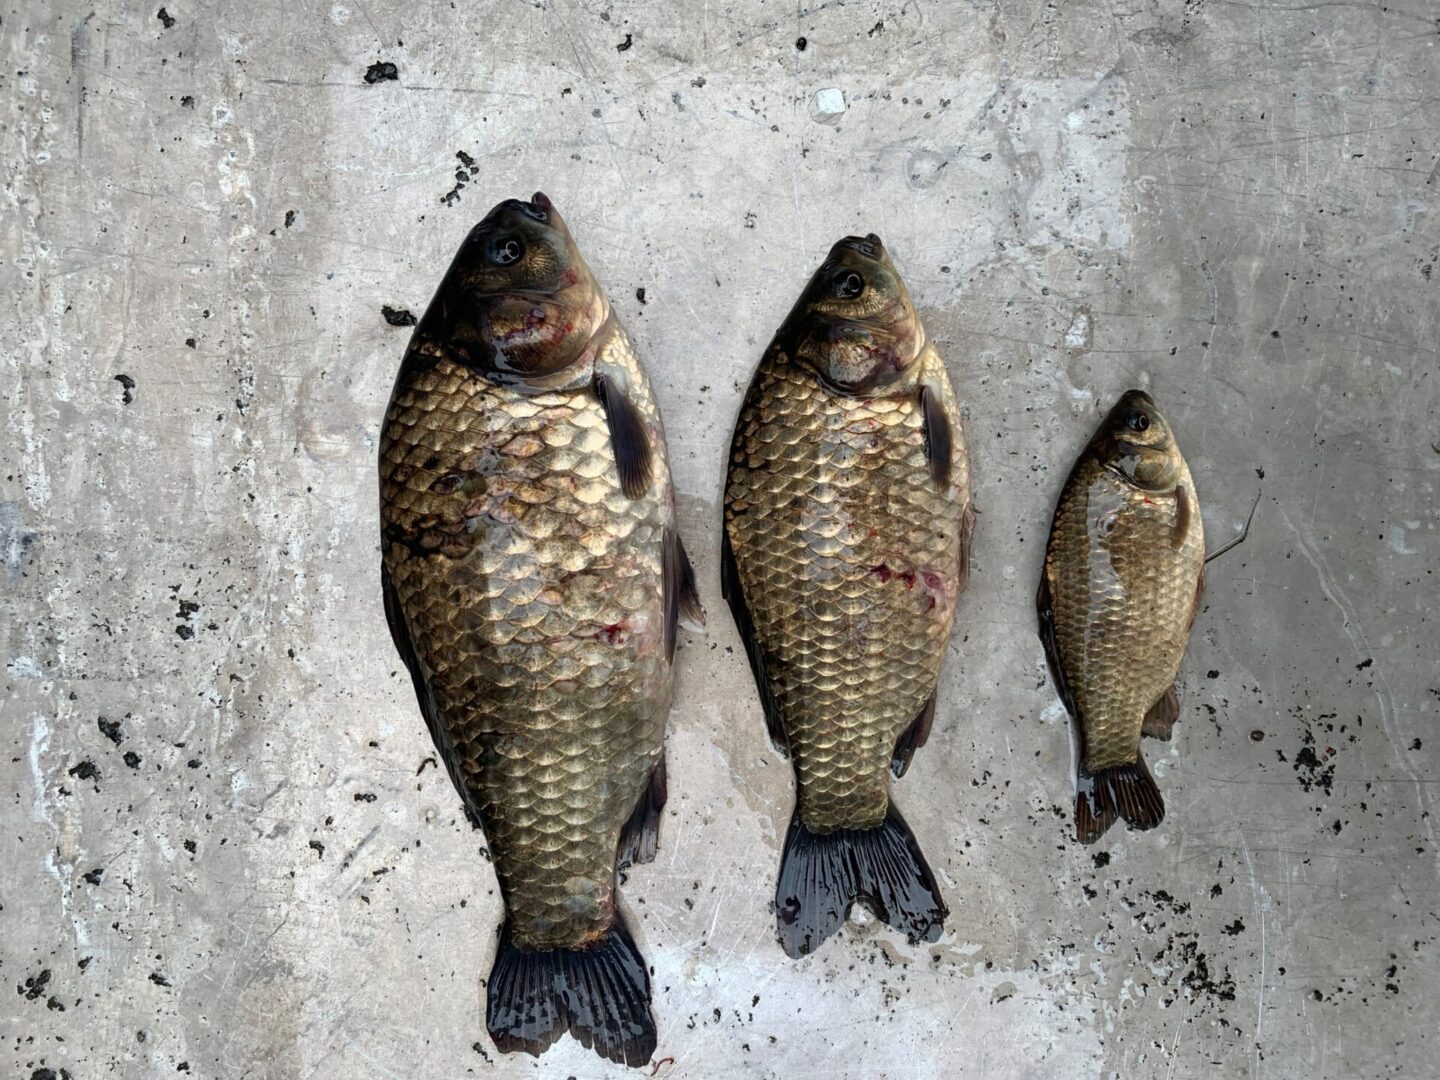 Three fish are sitting on the ground next to each other.